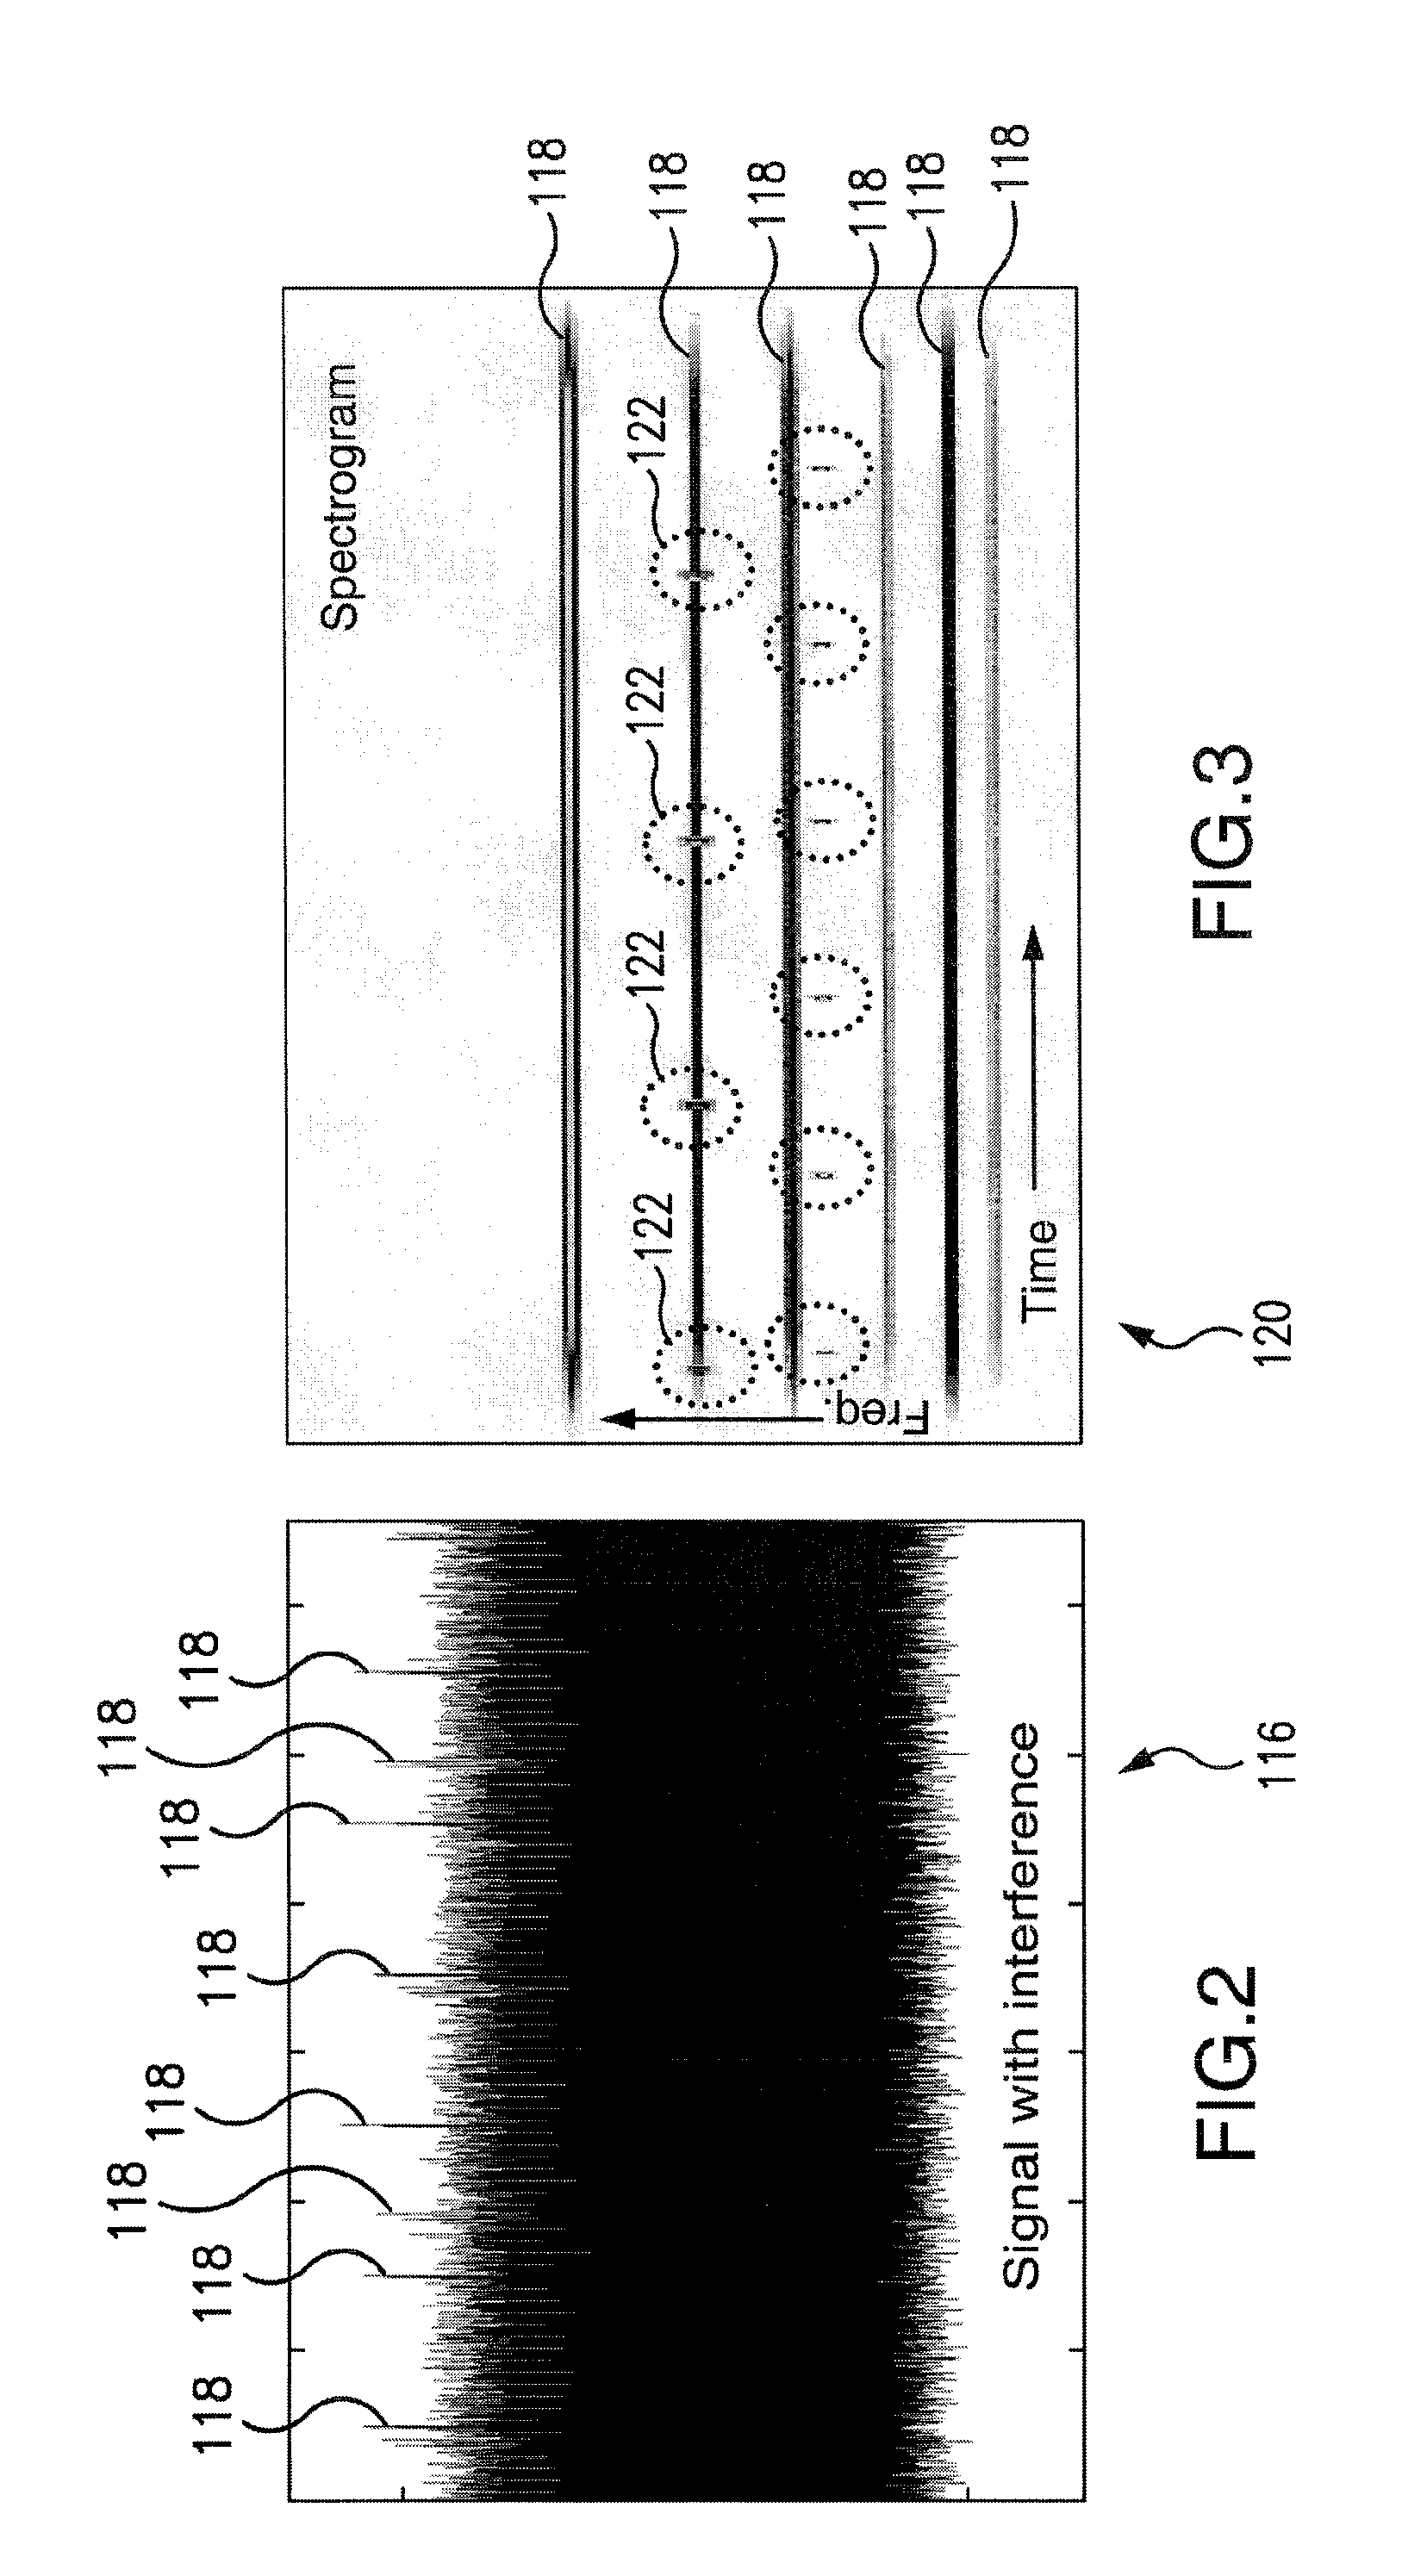 Method and System for Continuous Wave Interference Suppression in Pulsed Signal Processing